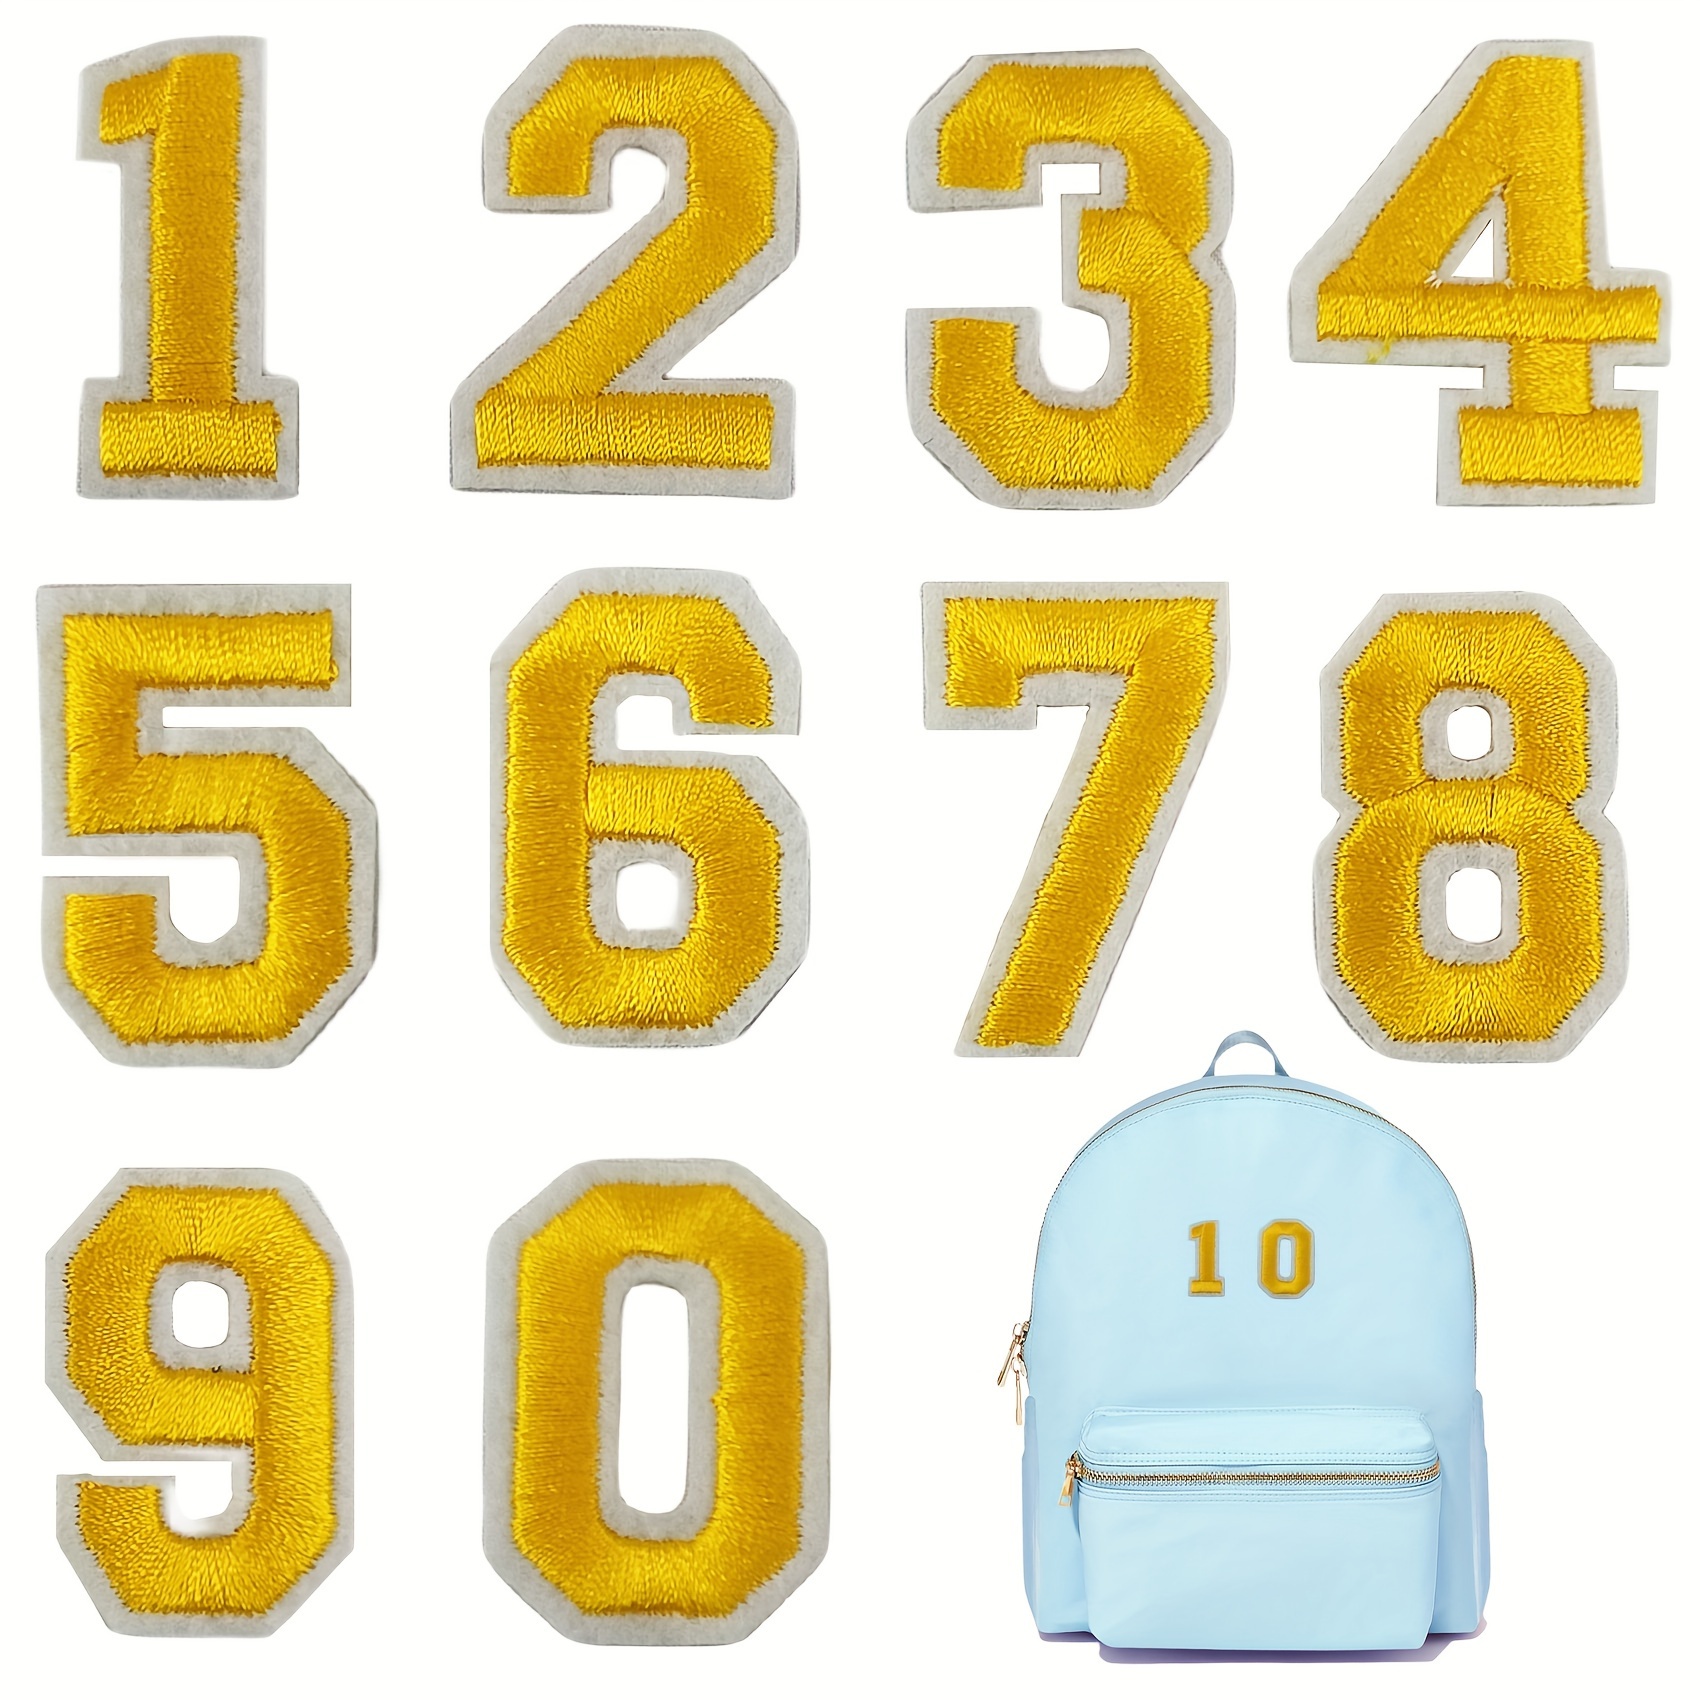 1 - Yellow Block Numbers - Iron on Applique/Embroidered Patch